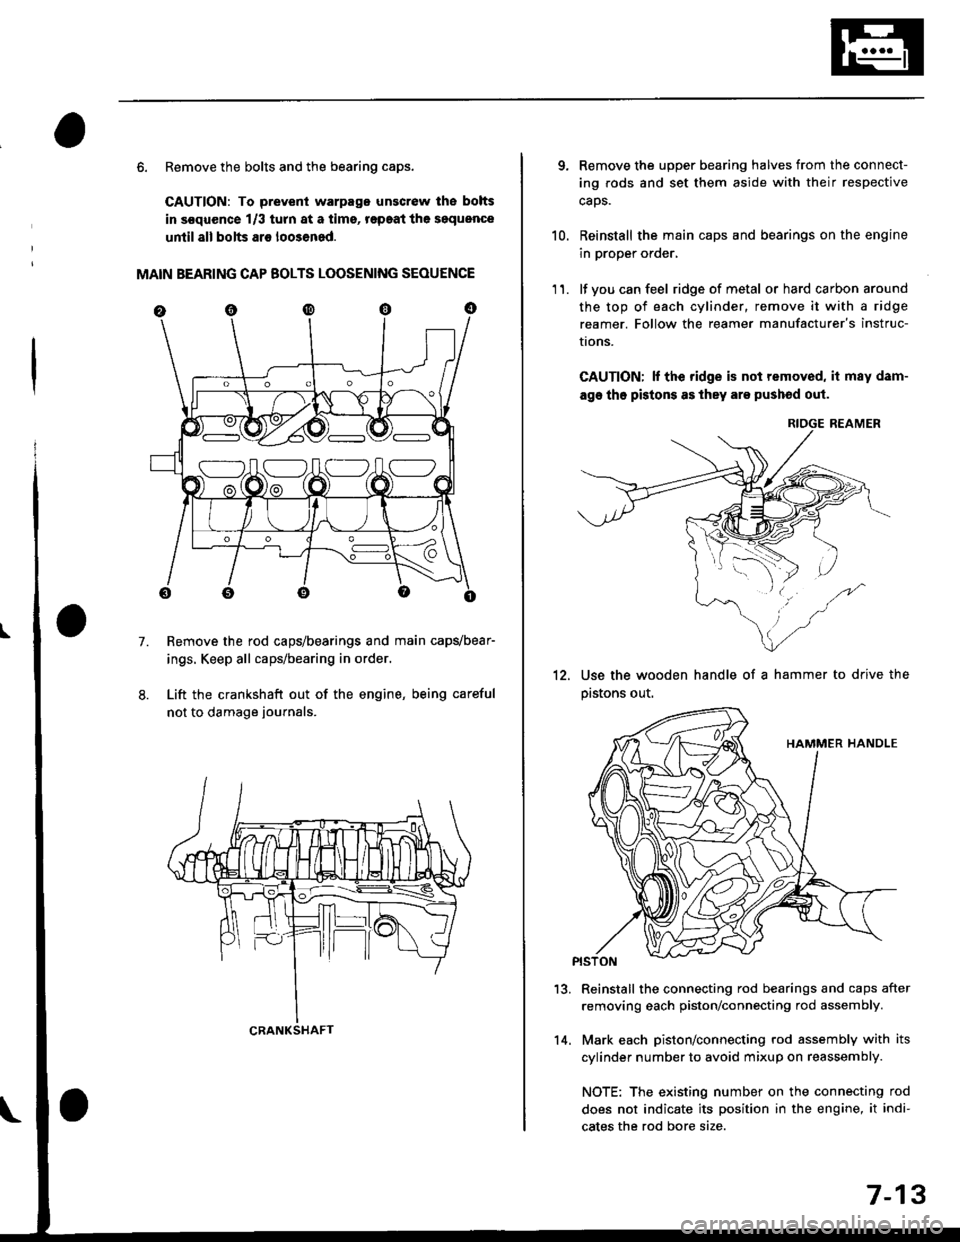 HONDA CIVIC 1999 6.G Workshop Manual 6. Remove the bolts and the bearing caps.
CAUTION: To prevenl warpago unscrow lhe bolts
in s€quence 1/3 turn at a tims, r€paat the soquence
until all bolts ar€ loo3ened.
MAIN BEARING CAP BOLTS L